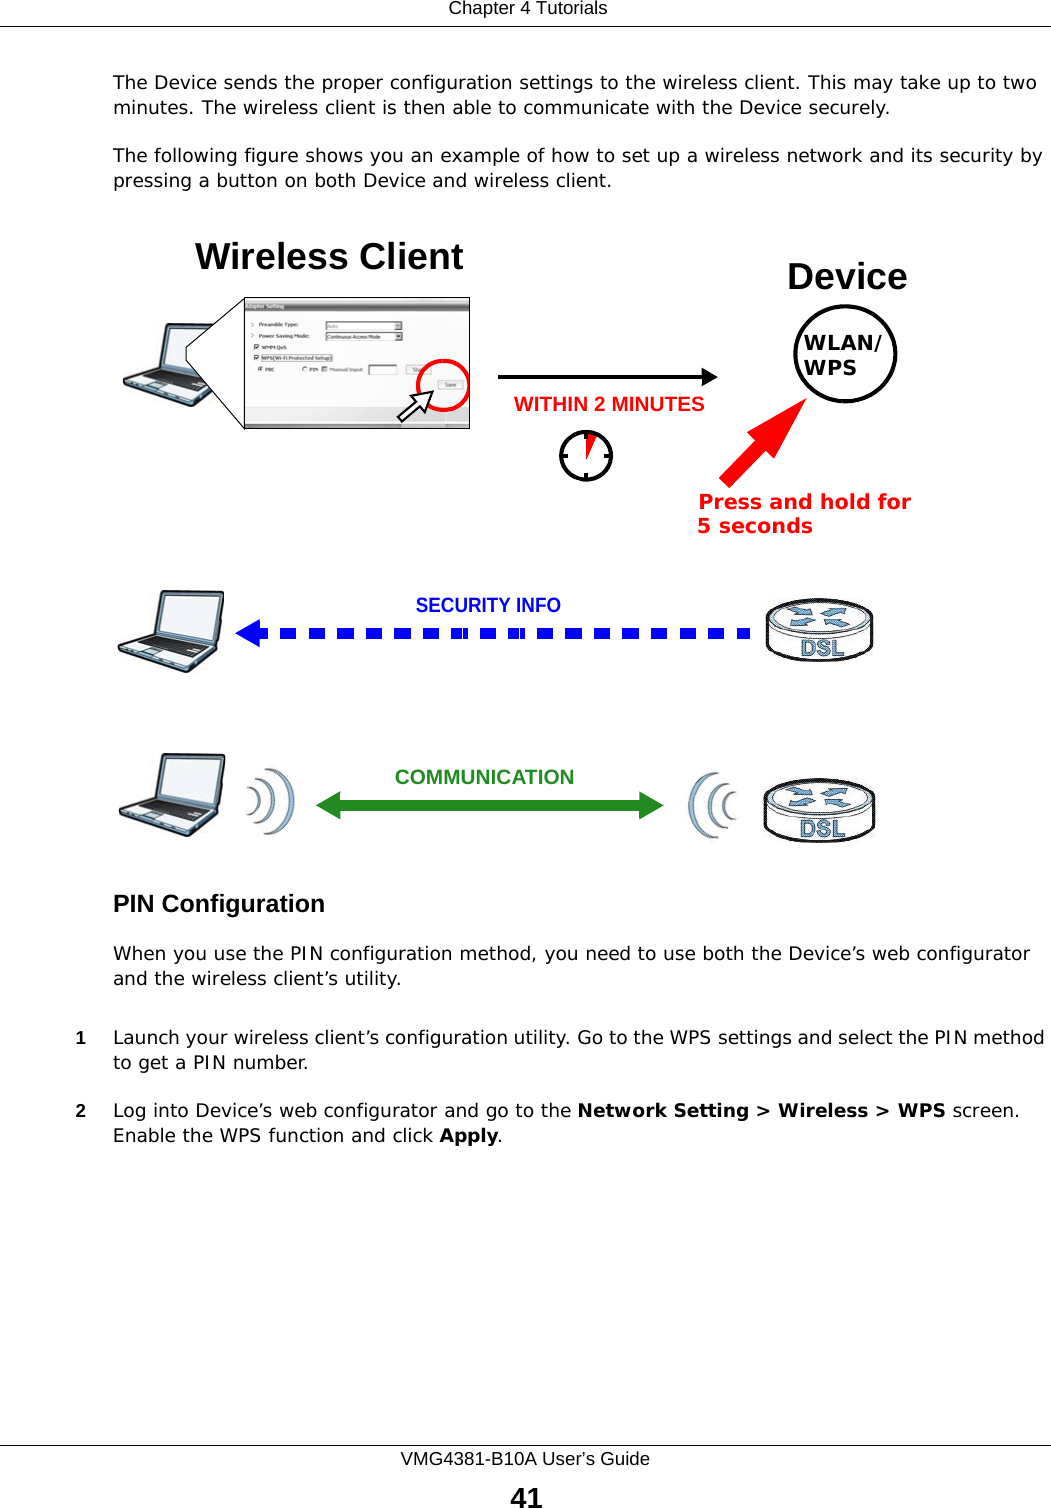  Chapter 4 TutorialsVMG4381-B10A User’s Guide41The Device sends the proper configuration settings to the wireless client. This may take up to two minutes. The wireless client is then able to communicate with the Device securely.The following figure shows you an example of how to set up a wireless network and its security by pressing a button on both Device and wireless client.Example WPS Process: PBC MethodPIN ConfigurationWhen you use the PIN configuration method, you need to use both the Device’s web configurator and the wireless client’s utility.1Launch your wireless client’s configuration utility. Go to the WPS settings and select the PIN method to get a PIN number.   2Log into Device’s web configurator and go to the Network Setting &gt; Wireless &gt; WPS screen. Enable the WPS function and click Apply. Wireless Client DeviceSECURITY INFOCOMMUNICATIONWITHIN 2 MINUTESPress and hold for   5 secondsWLAN/WPS